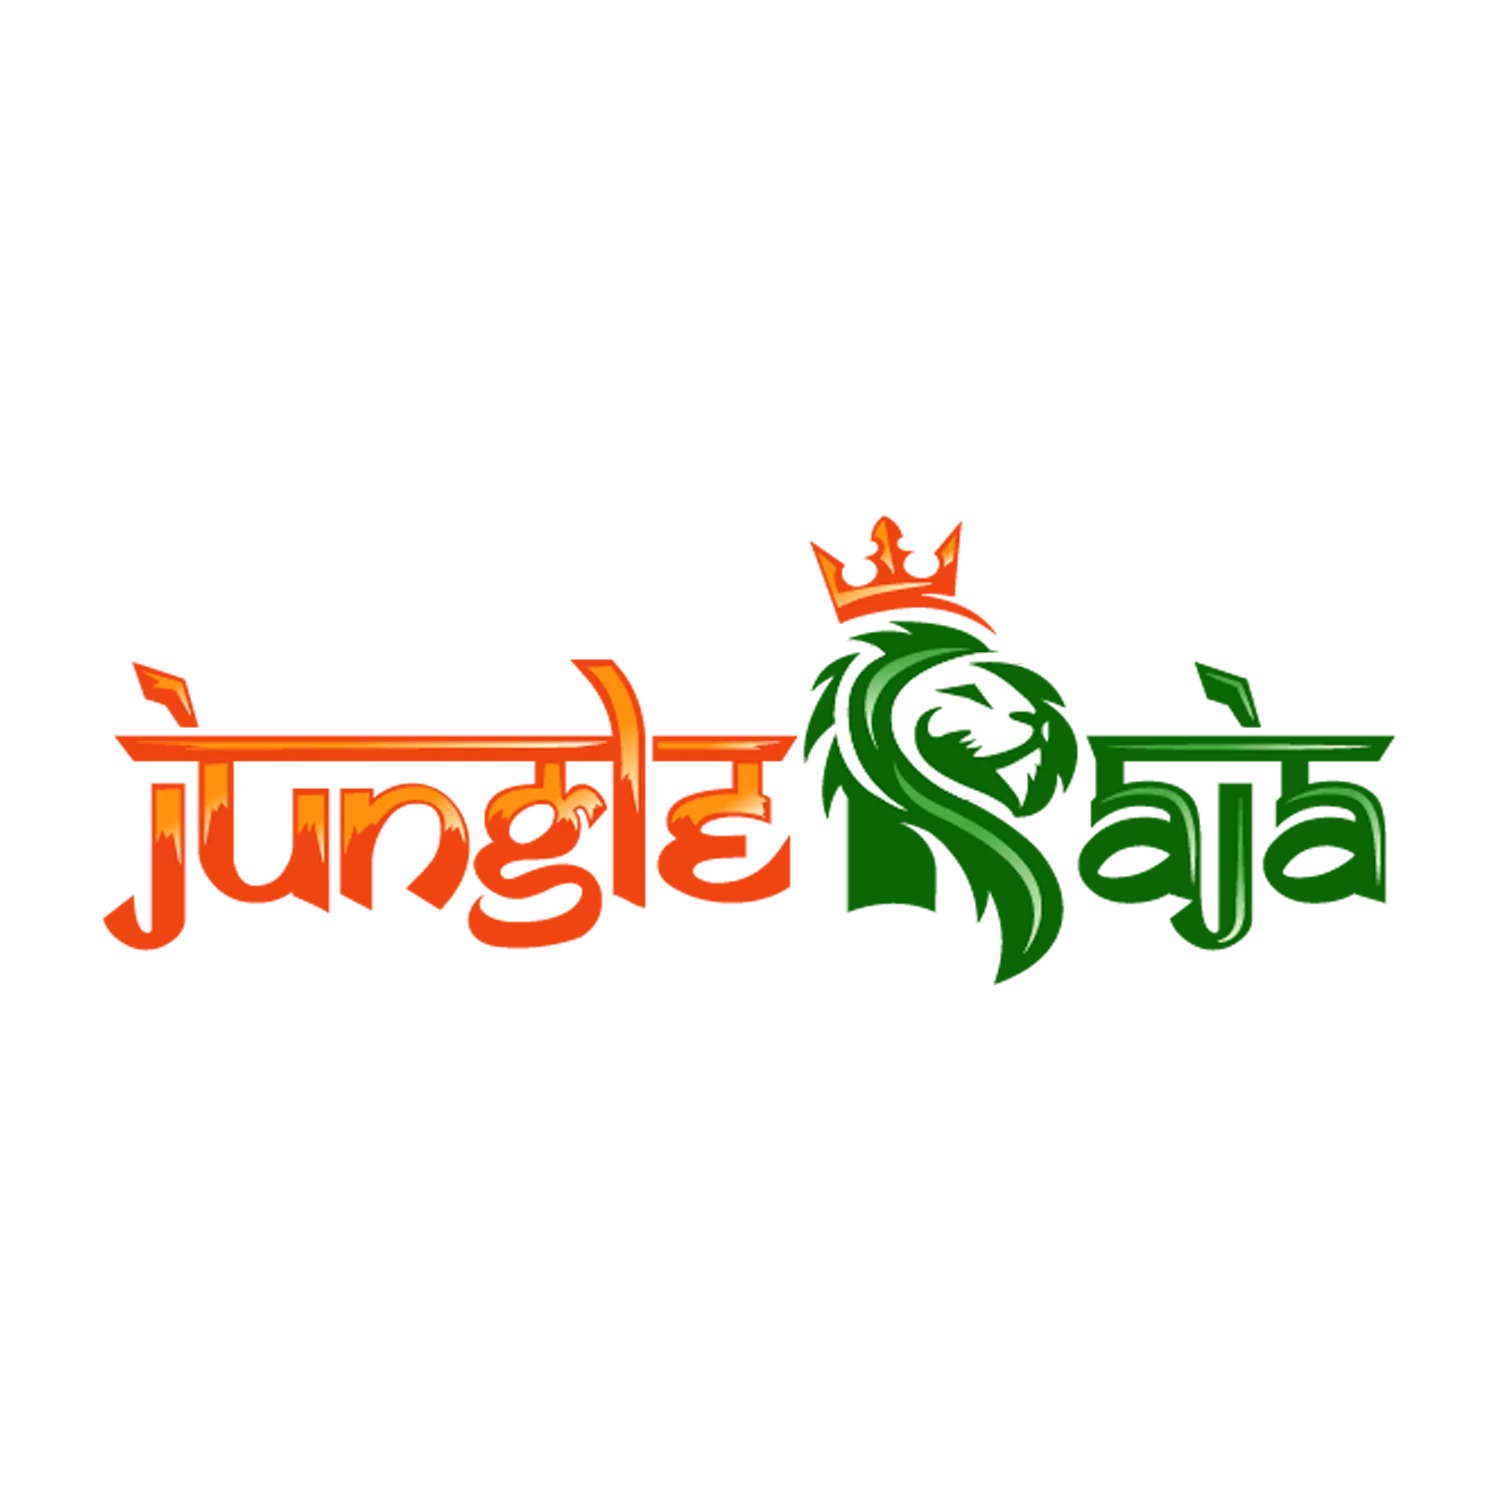 Learn from this article how to play online casino games at the JungleRaja site.